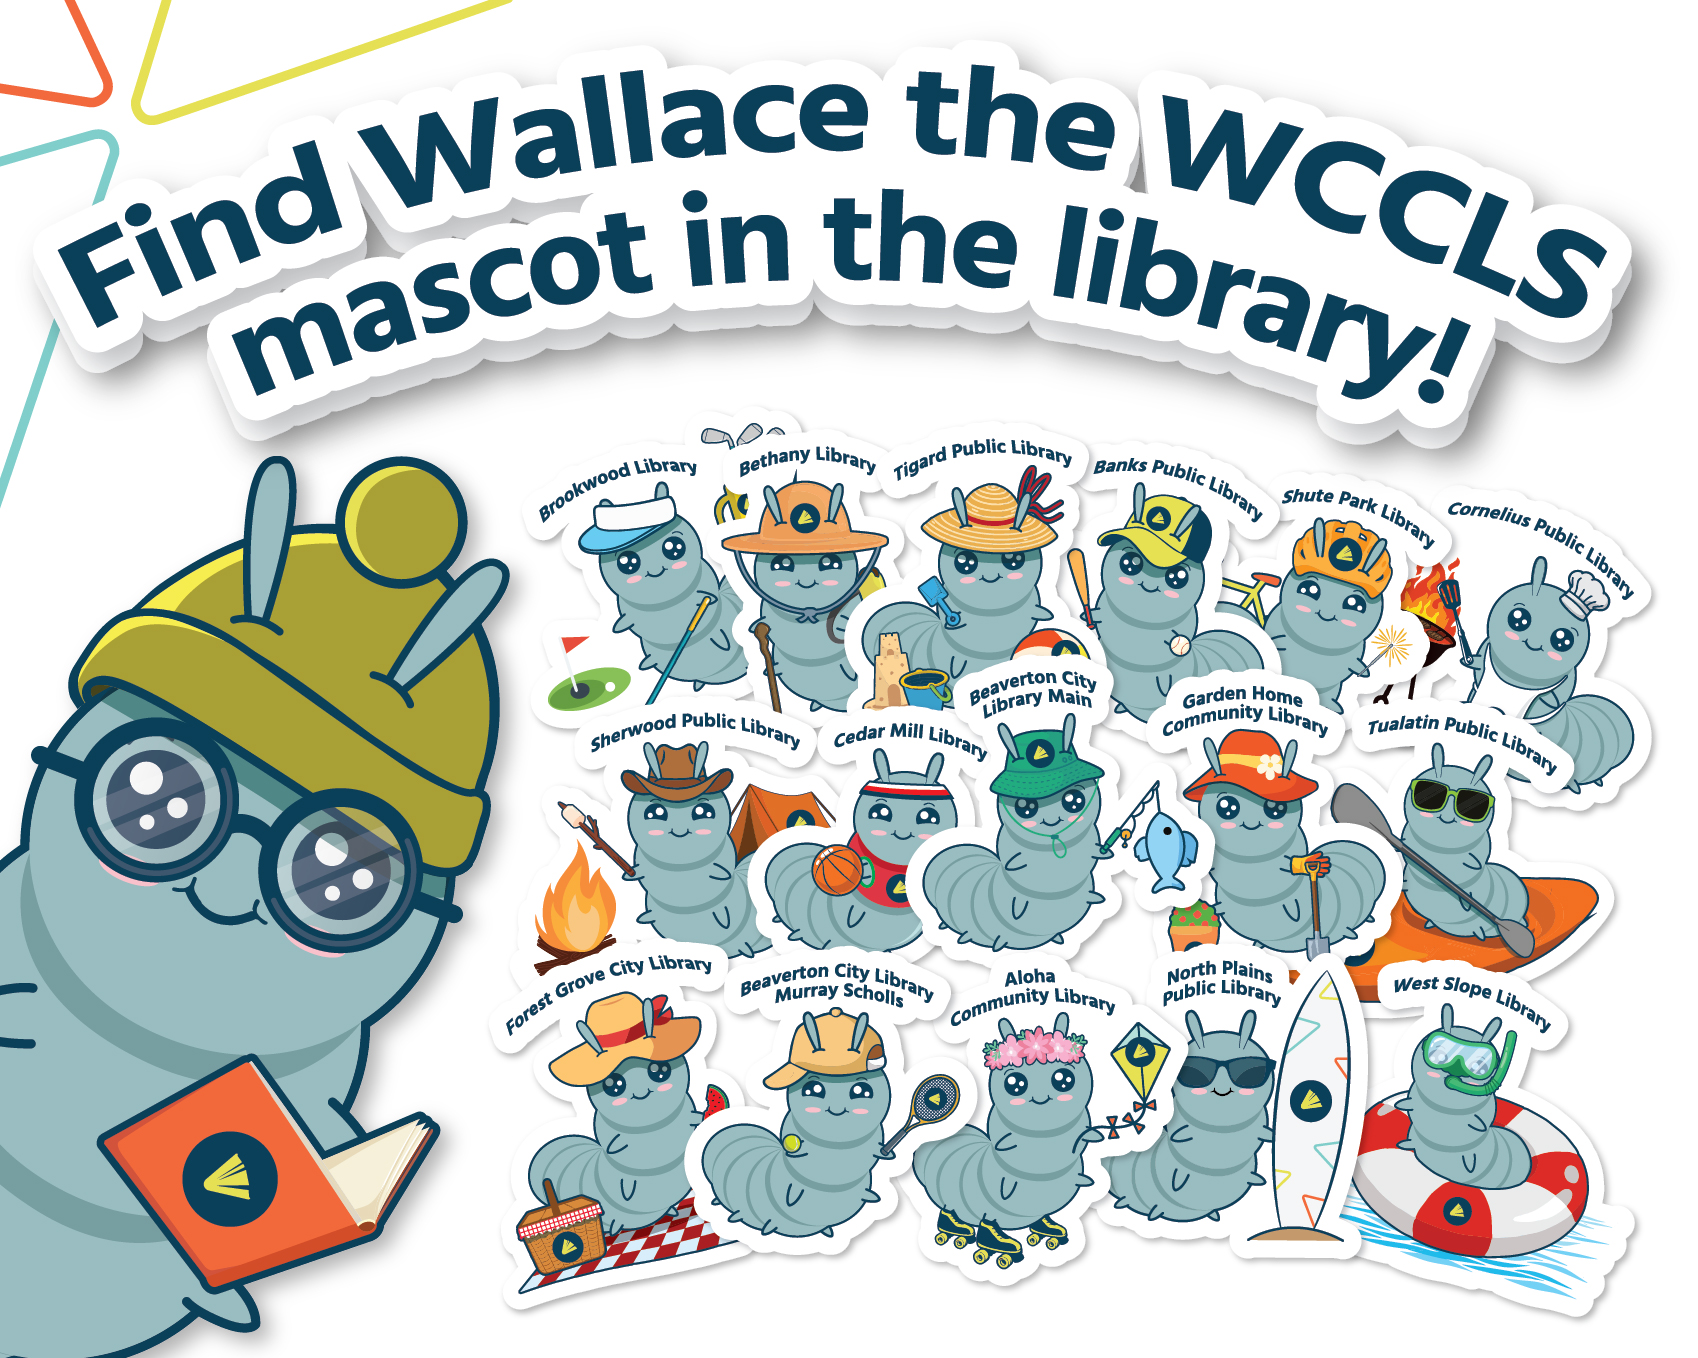 Find Wallace the WCCLS mascot in the library.